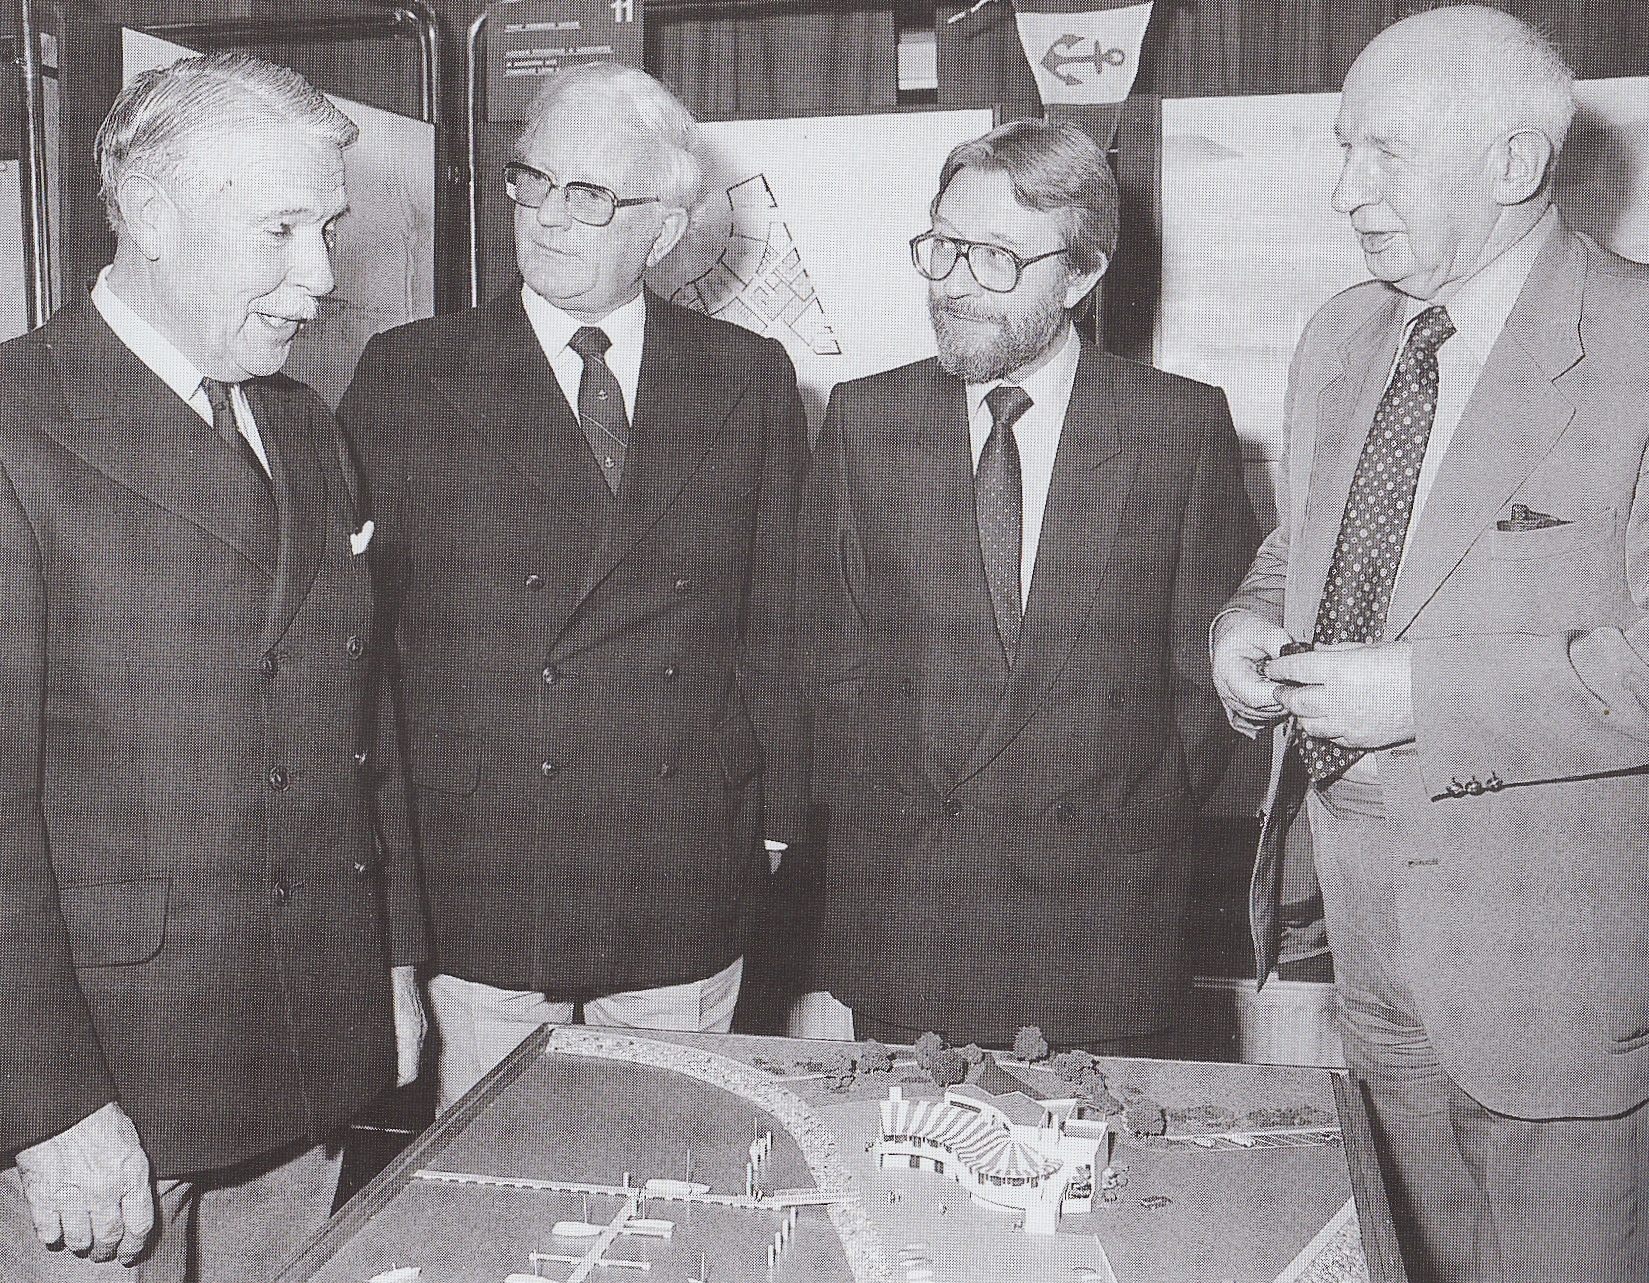 After the competition organised by the Royal Institute of Architects in Ireland for a new clubhouse design attracted 18 entries, the winning project was unveiled in November 1984. With the model of the proposed new building are (left to right) Bill Cuffe-Smith (Commodore Howth YC), architects Vincent Fitzgerald and Reg Chandler, and Martin D Burke, President of the RIAI.   